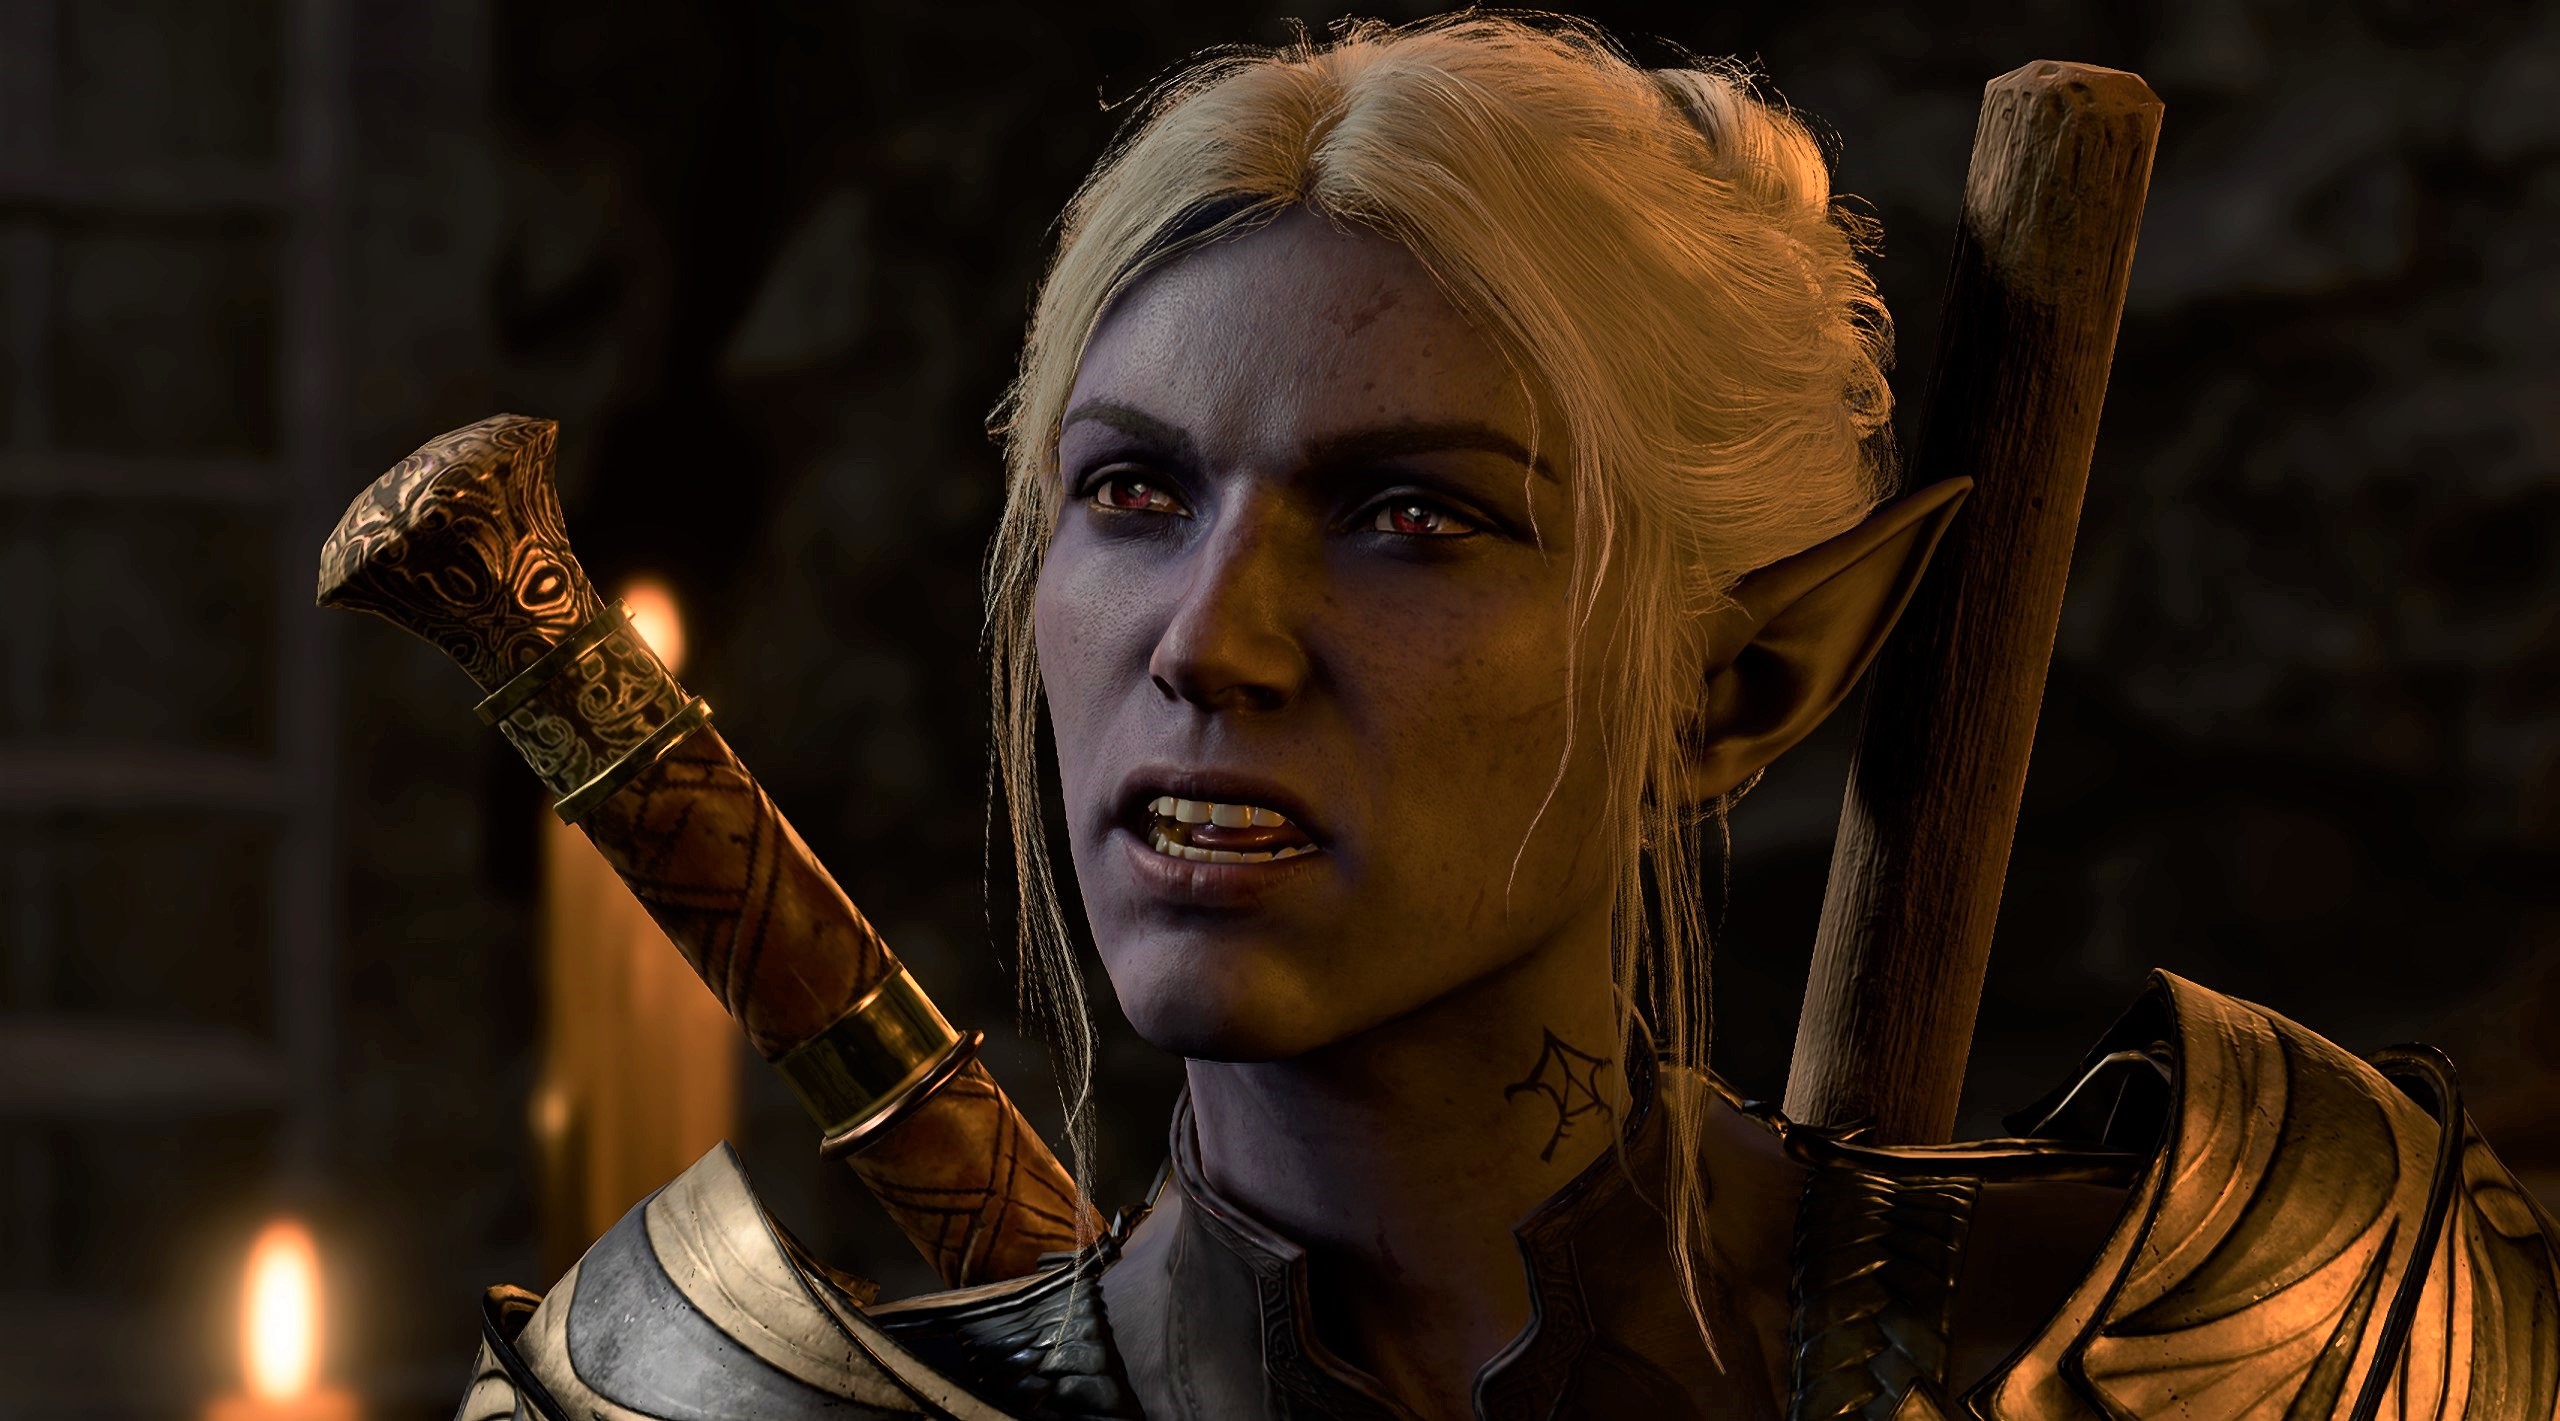 Baldur's Gate 3: How to Recruit Minthara Without Betraying the Grove